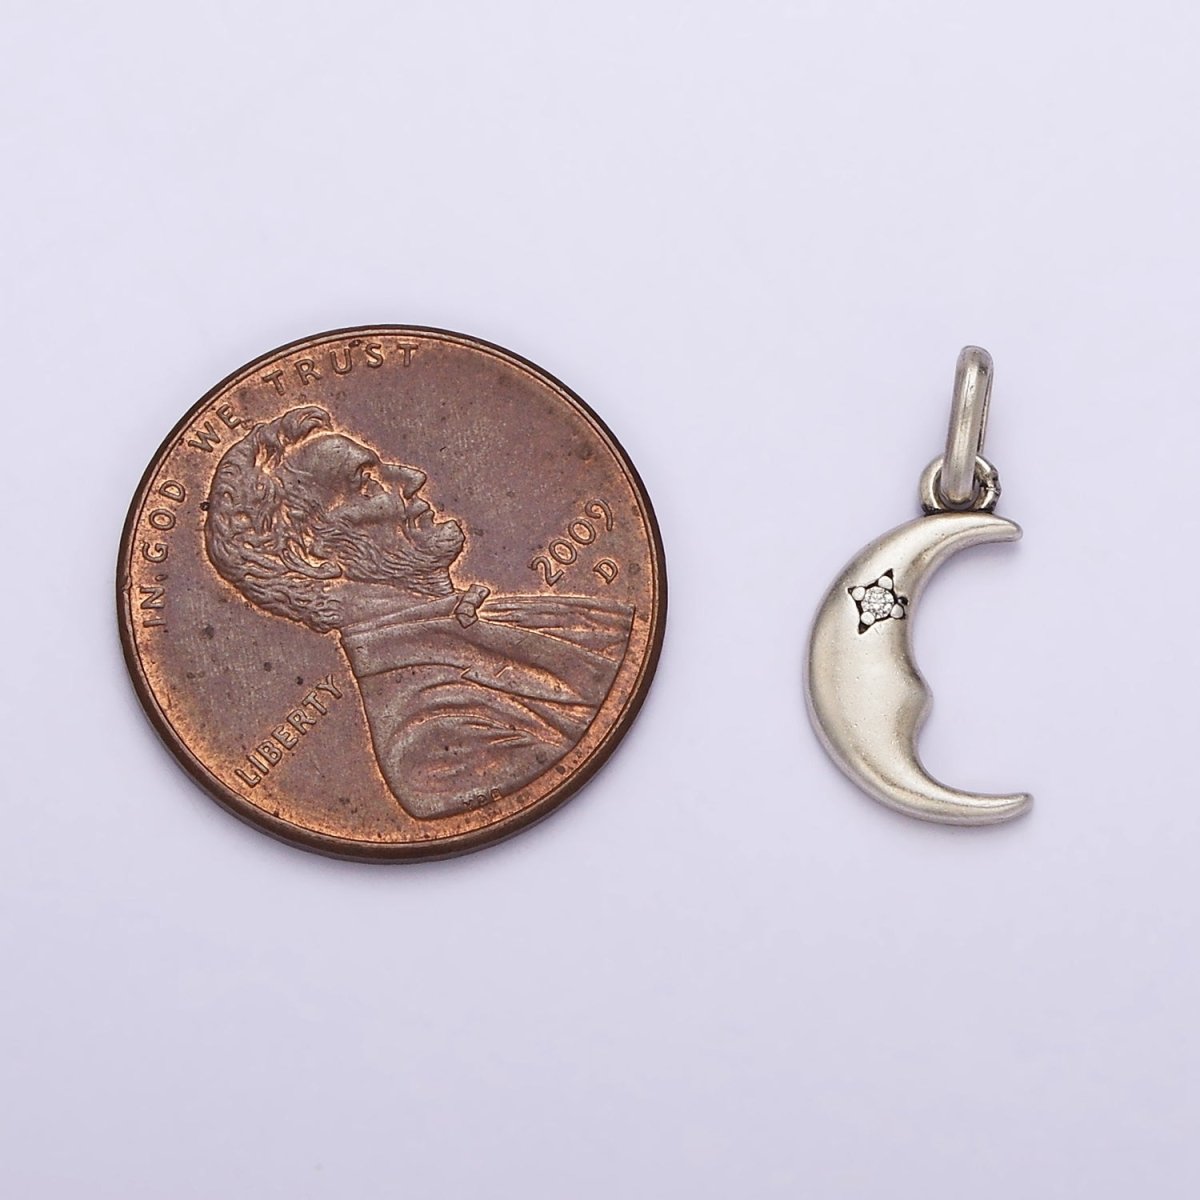 Dainty Crescent Moon Charm in 925 Sterling Silver Pendant Celestial Jewelry SL-332 - DLUXCA